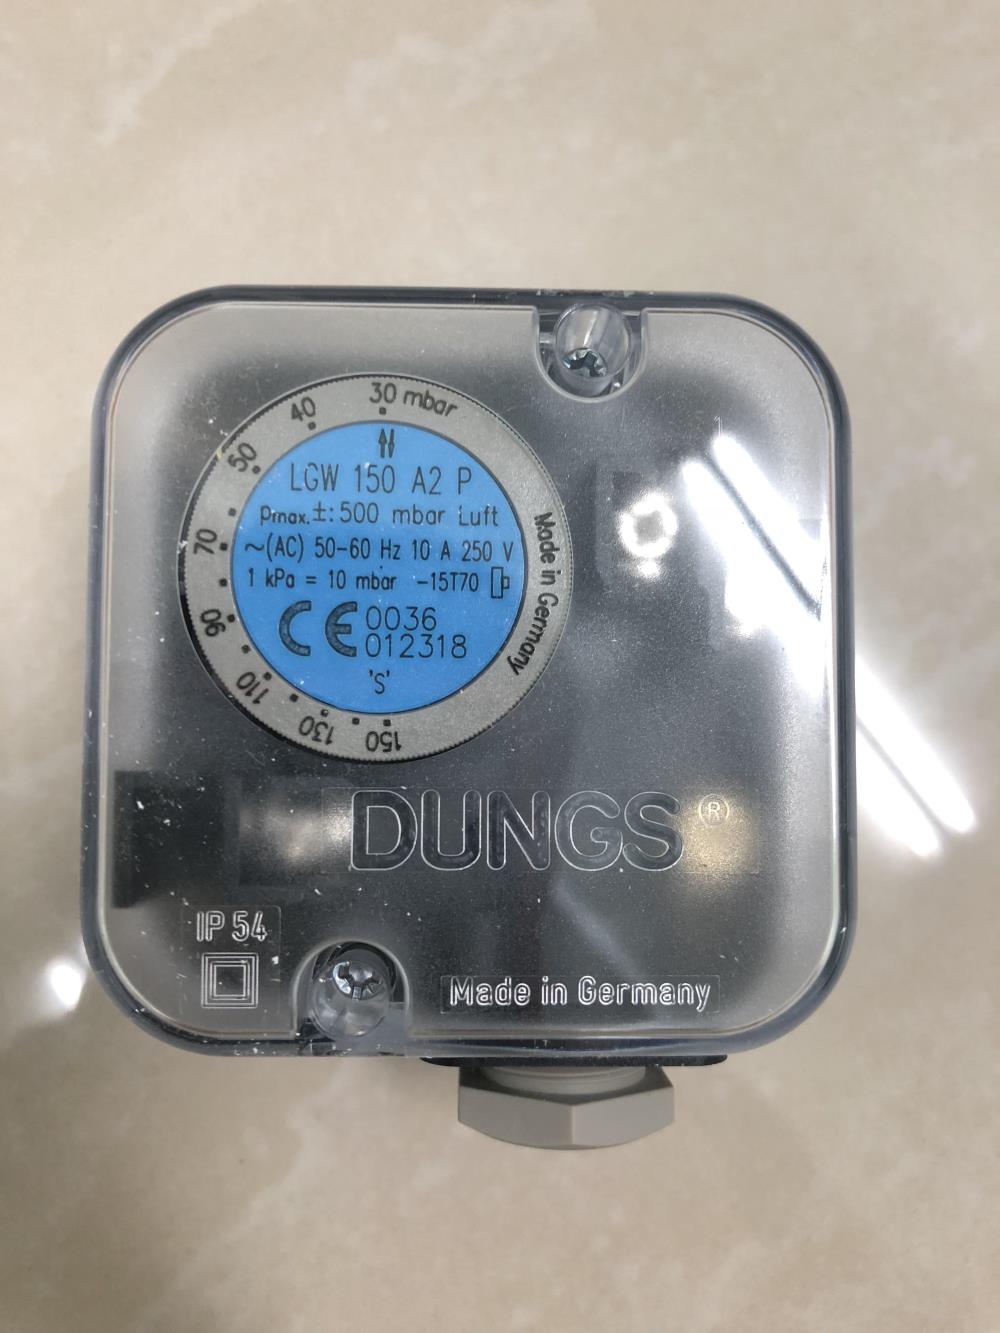 Dungs pressure switch LGW150 A2P